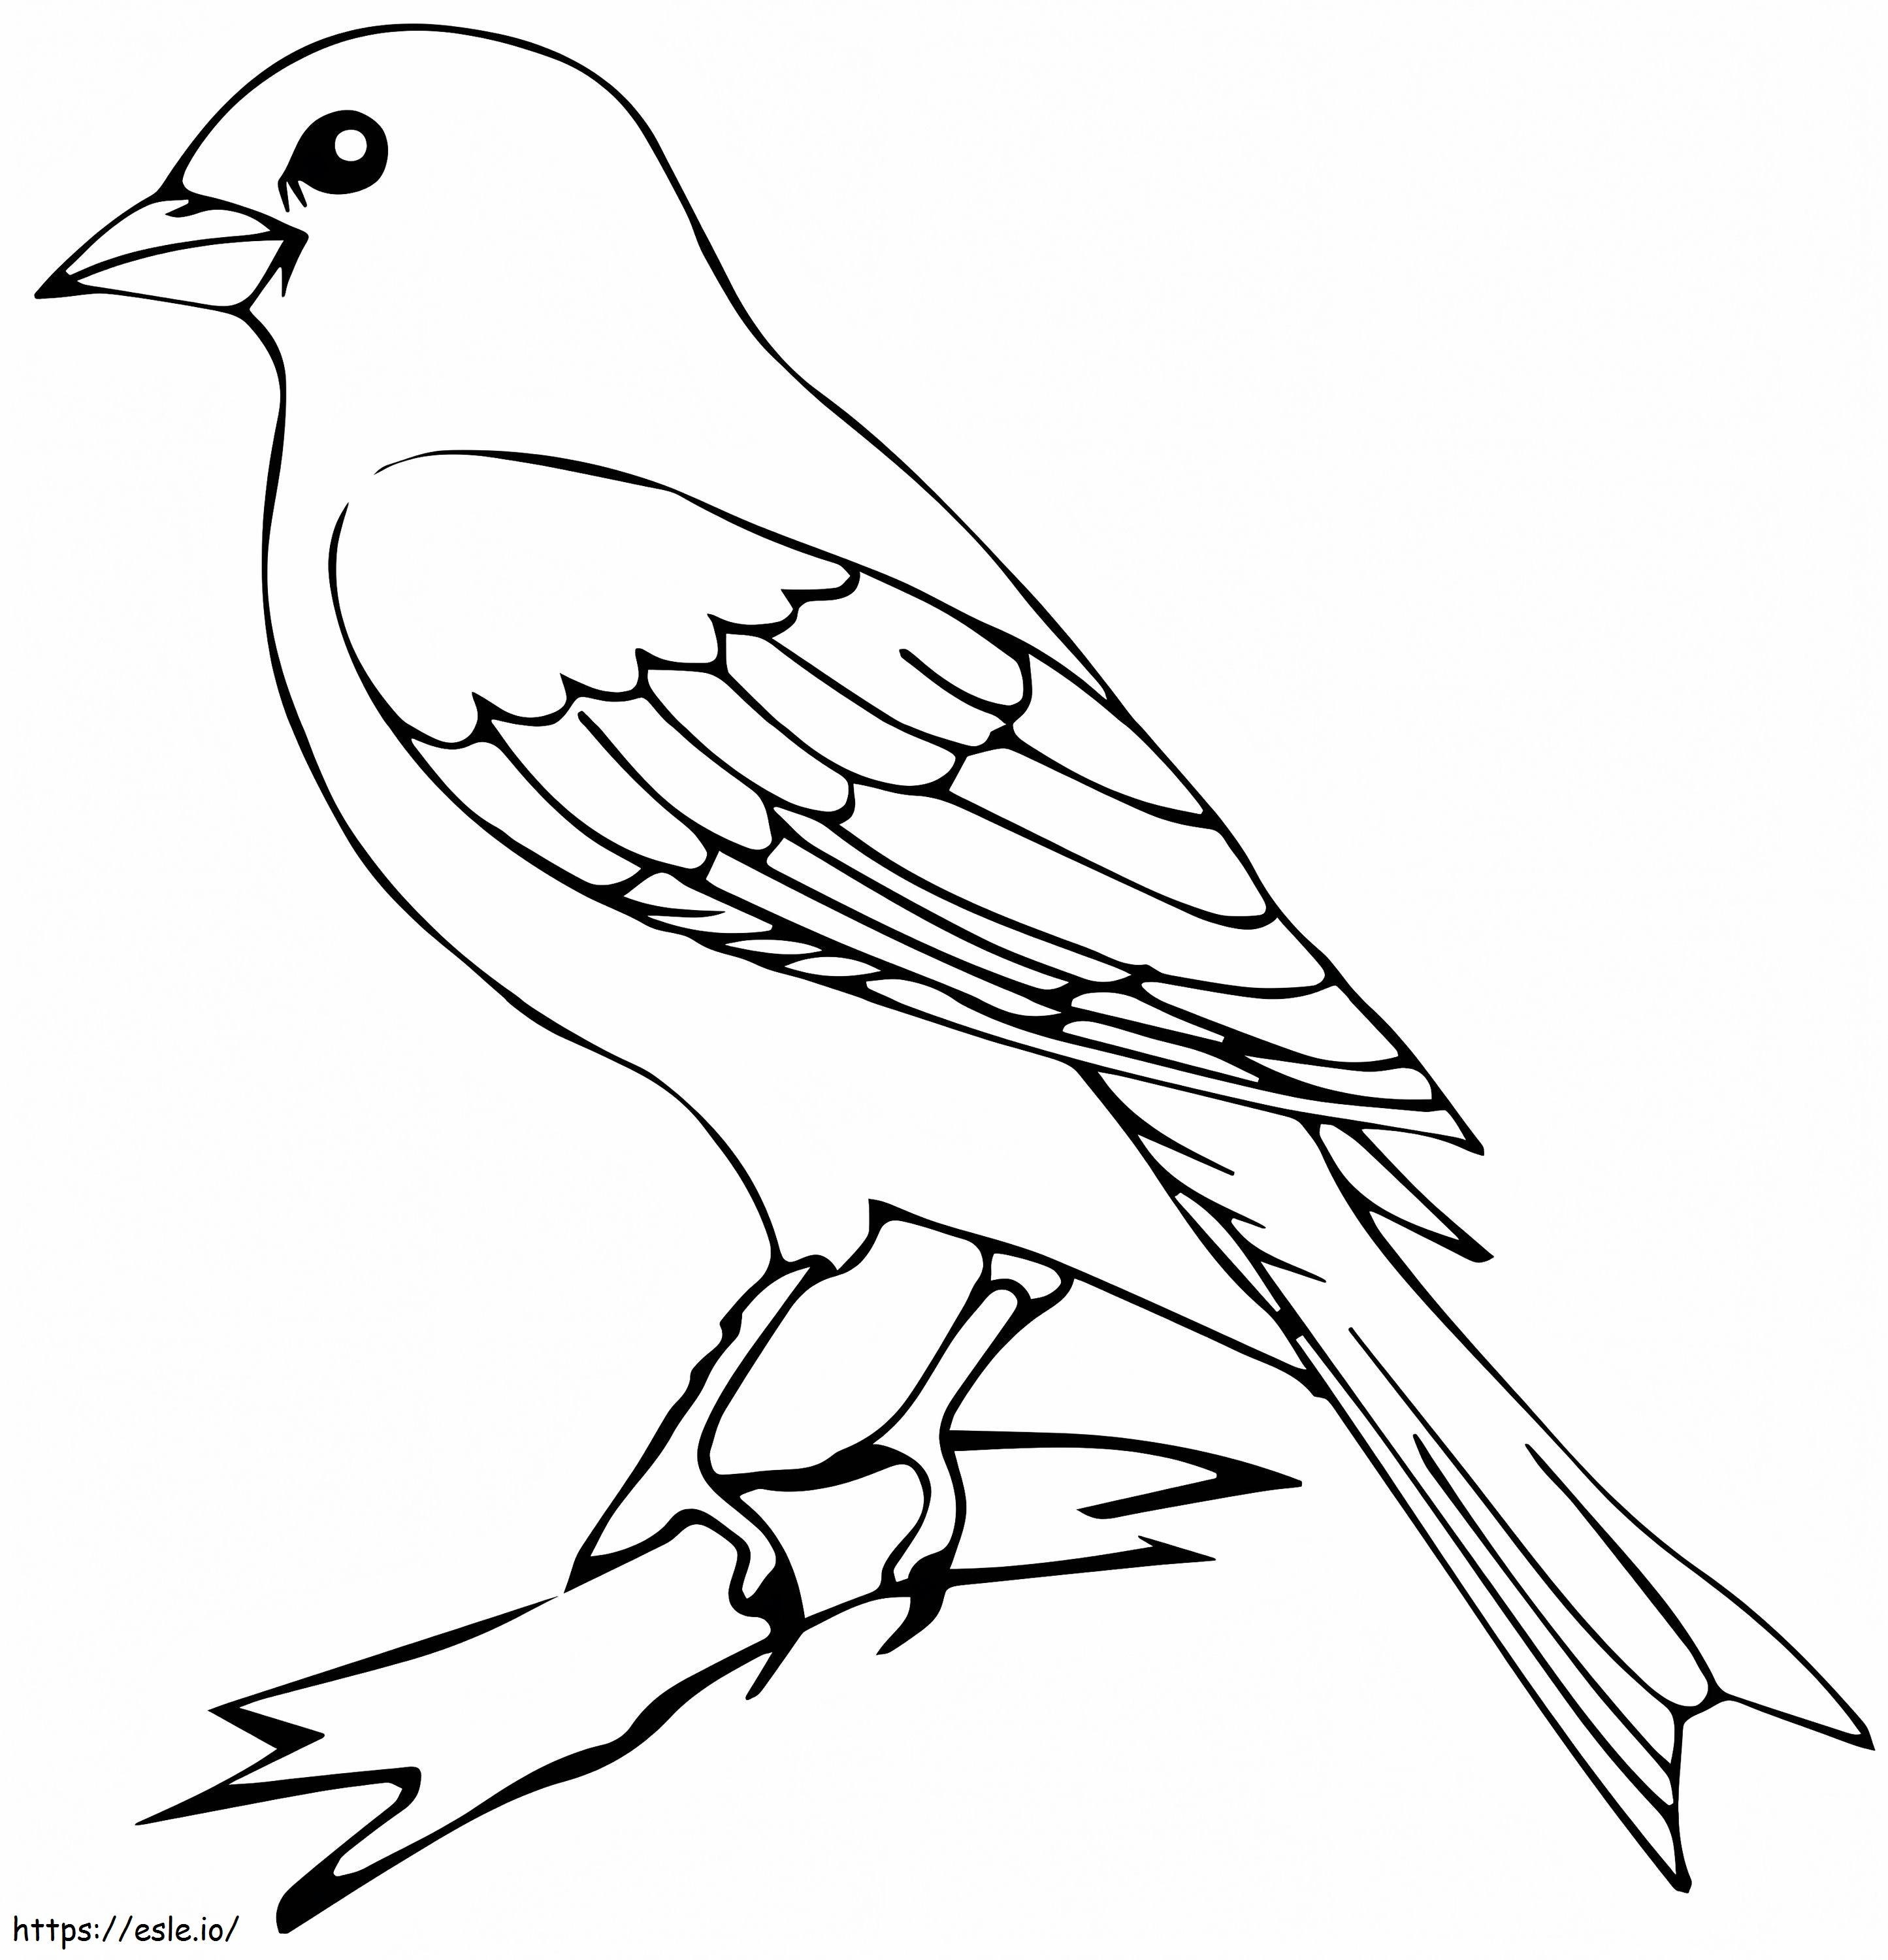 1560415599 Canary Bird A4 coloring page